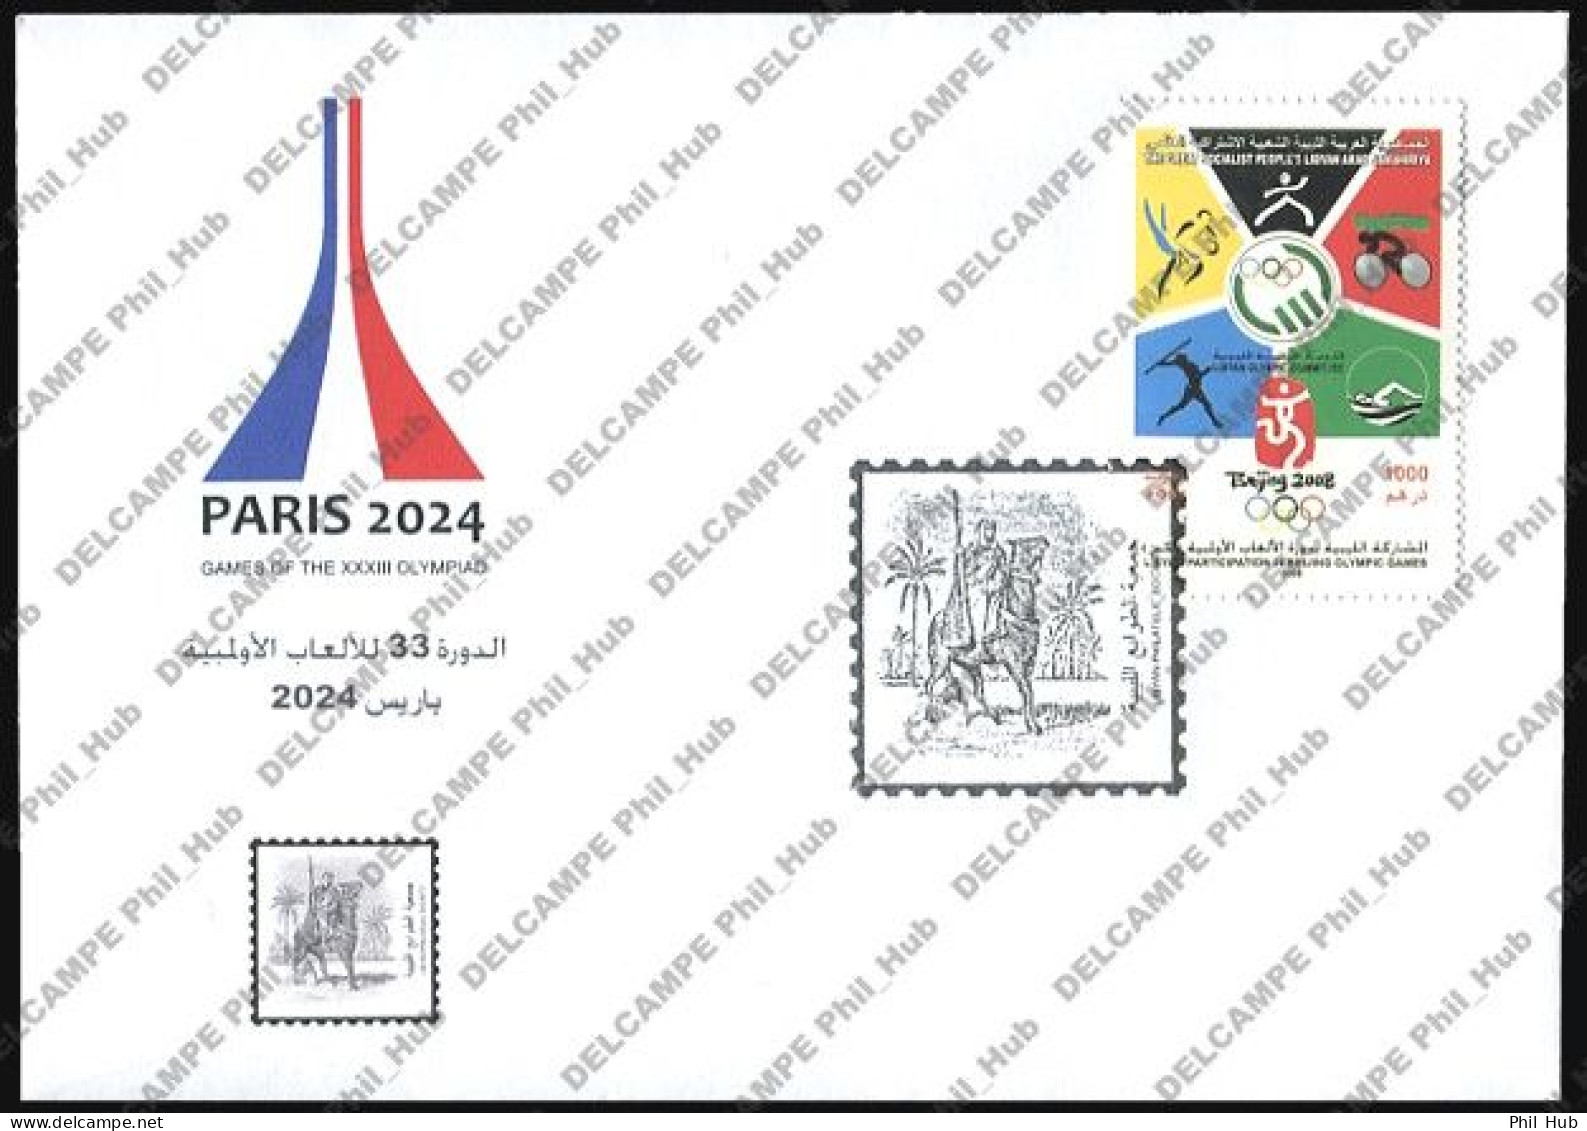 2024 PARIS FRANCE OLYMPICS (Libya Special Olympic Cover - #3) - Sommer 2024: Paris